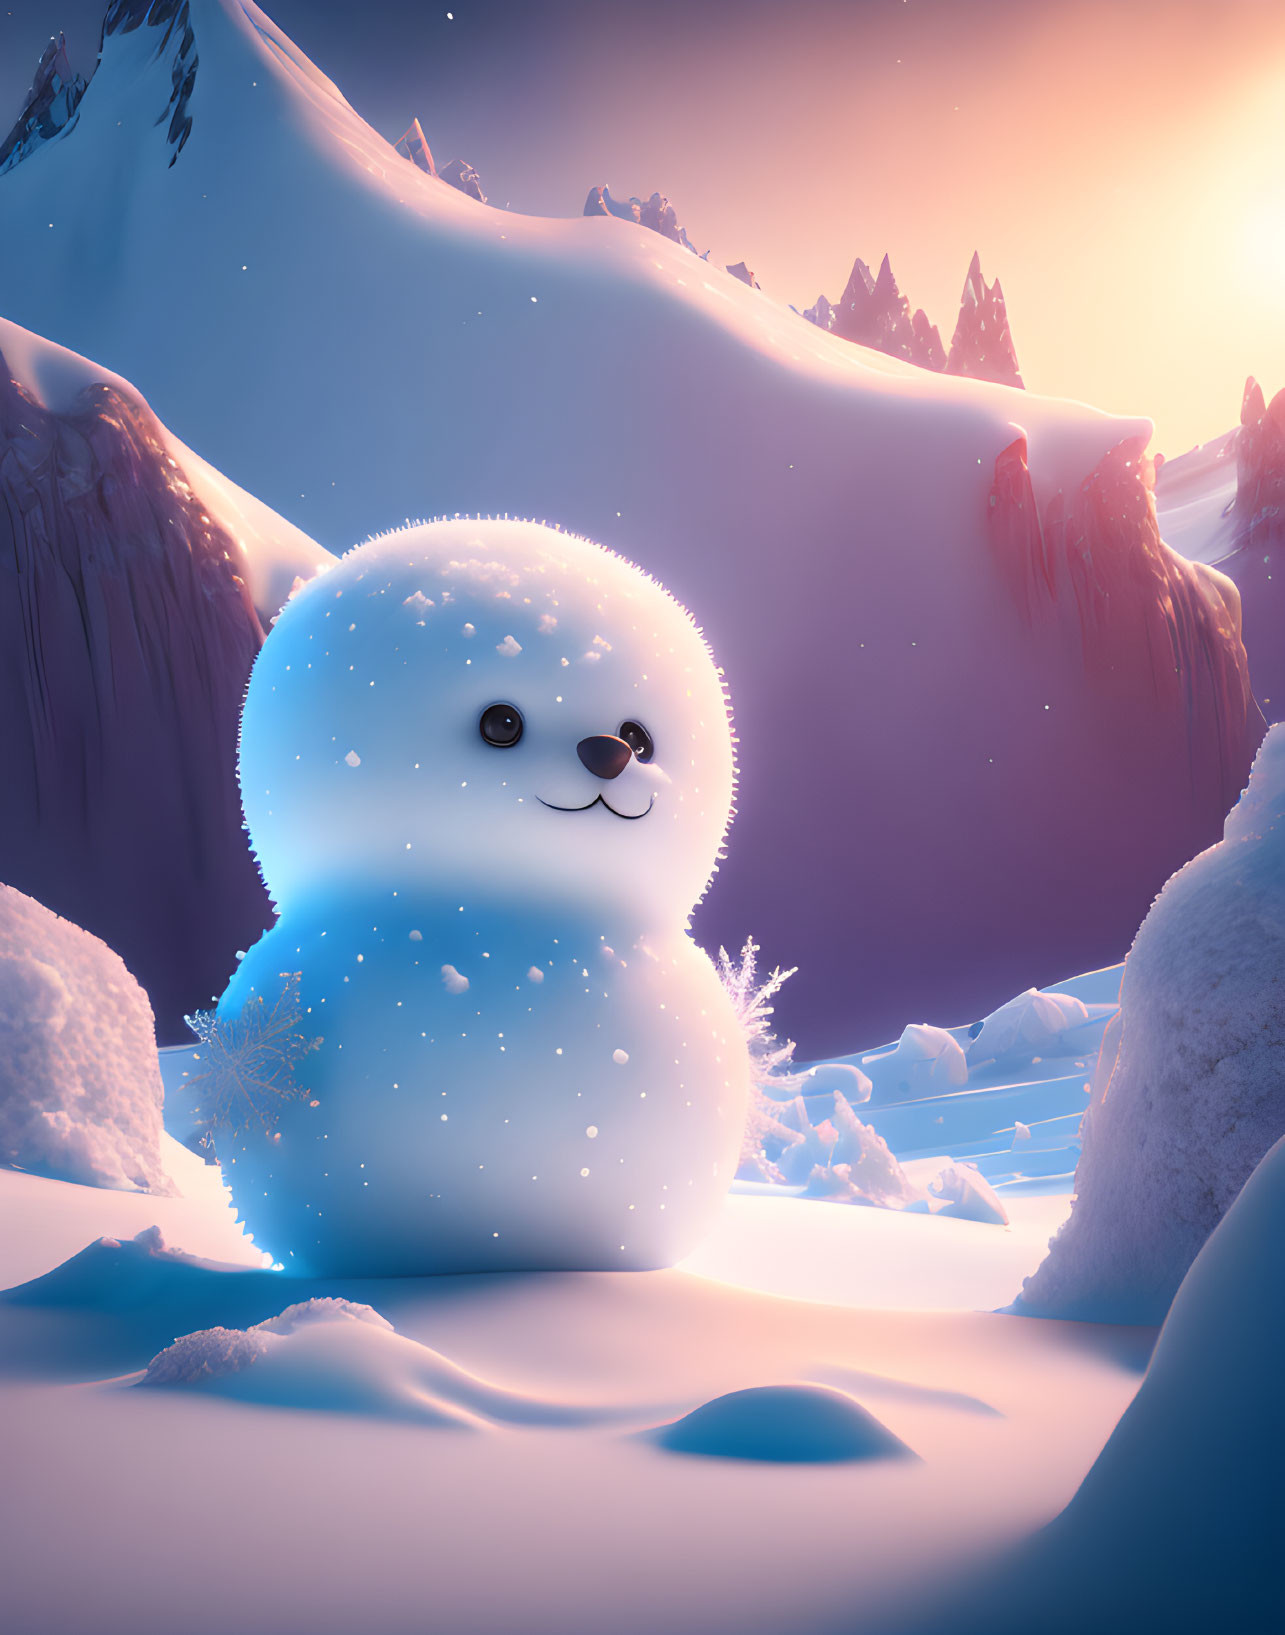 Stylized snowy landscape with cute snow creature at sunset